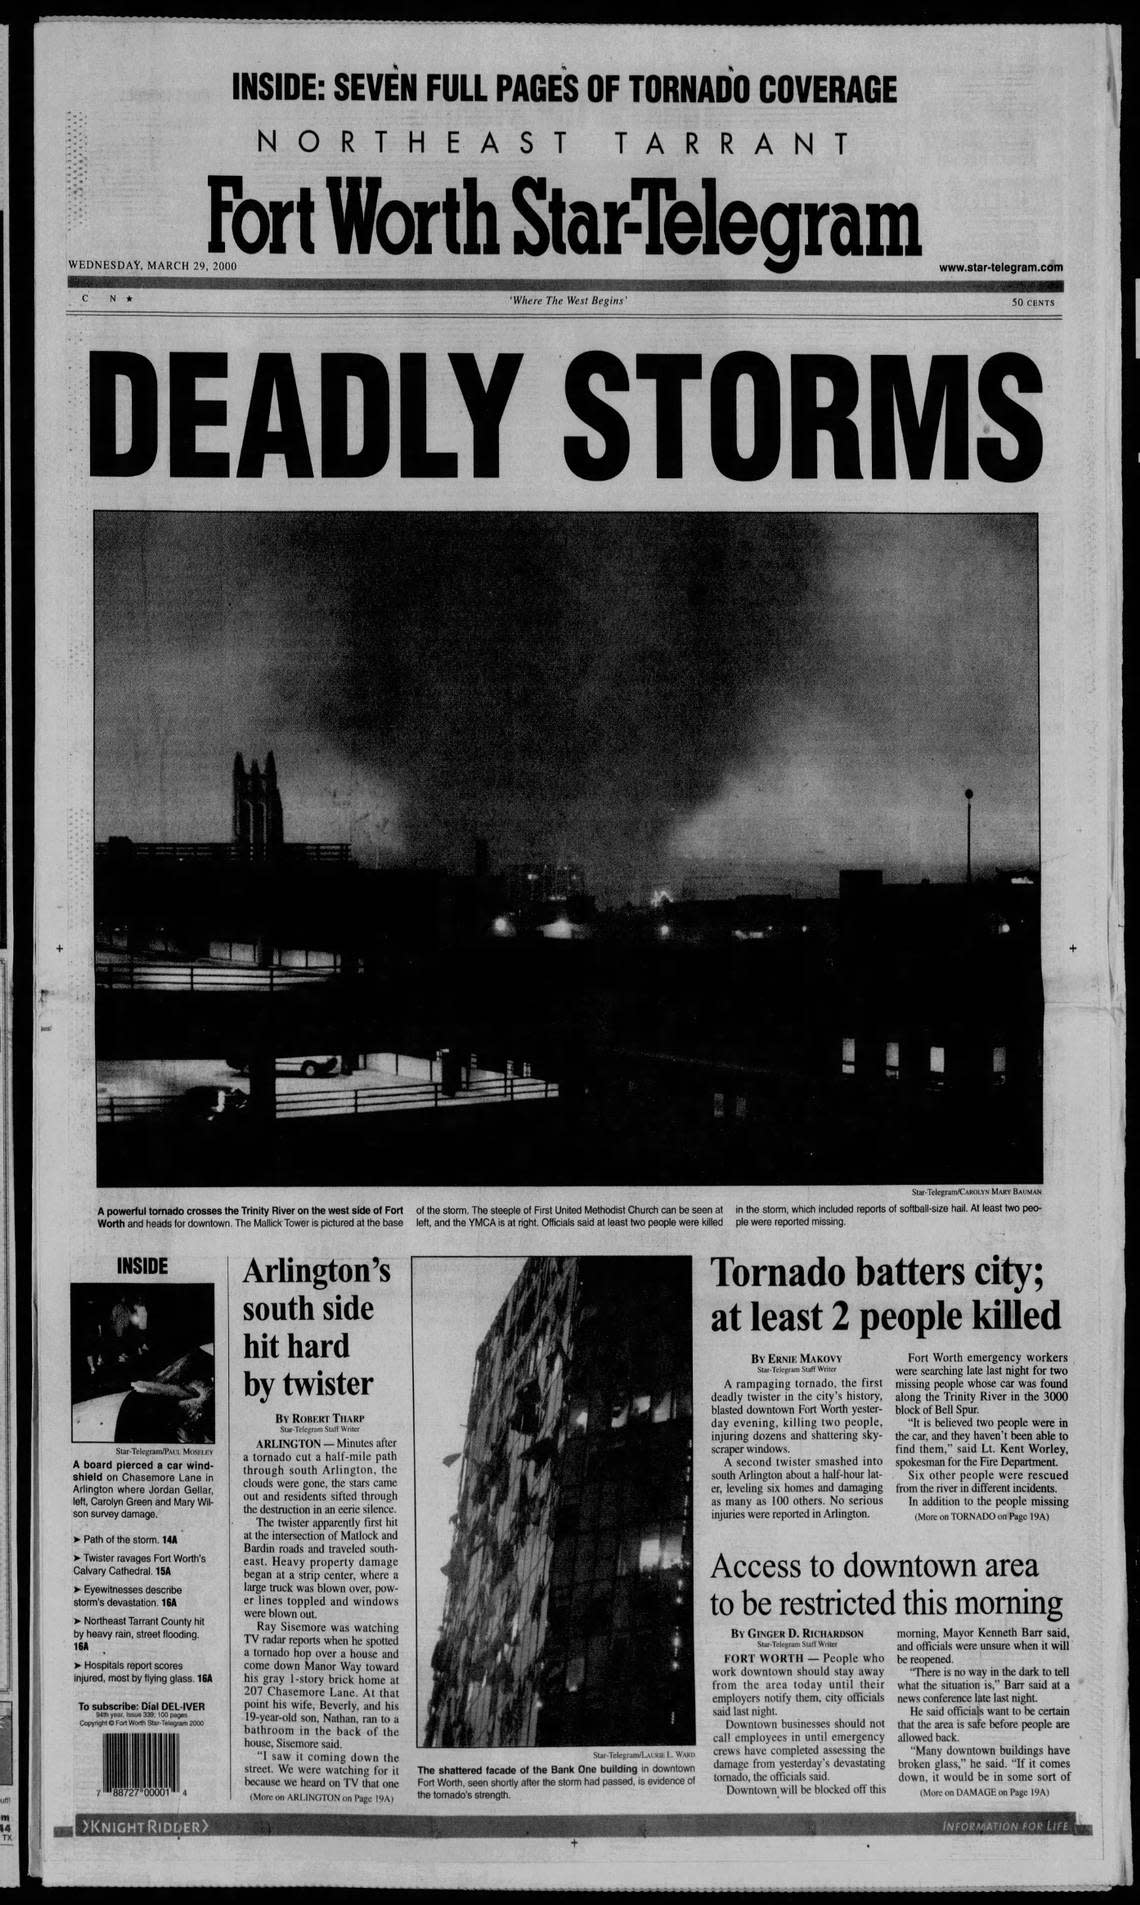 The front page of the Fort Worth Star-Telegram on March 29, 2000, the day after deadly tornadoes hit Fort Worth and Arlington.